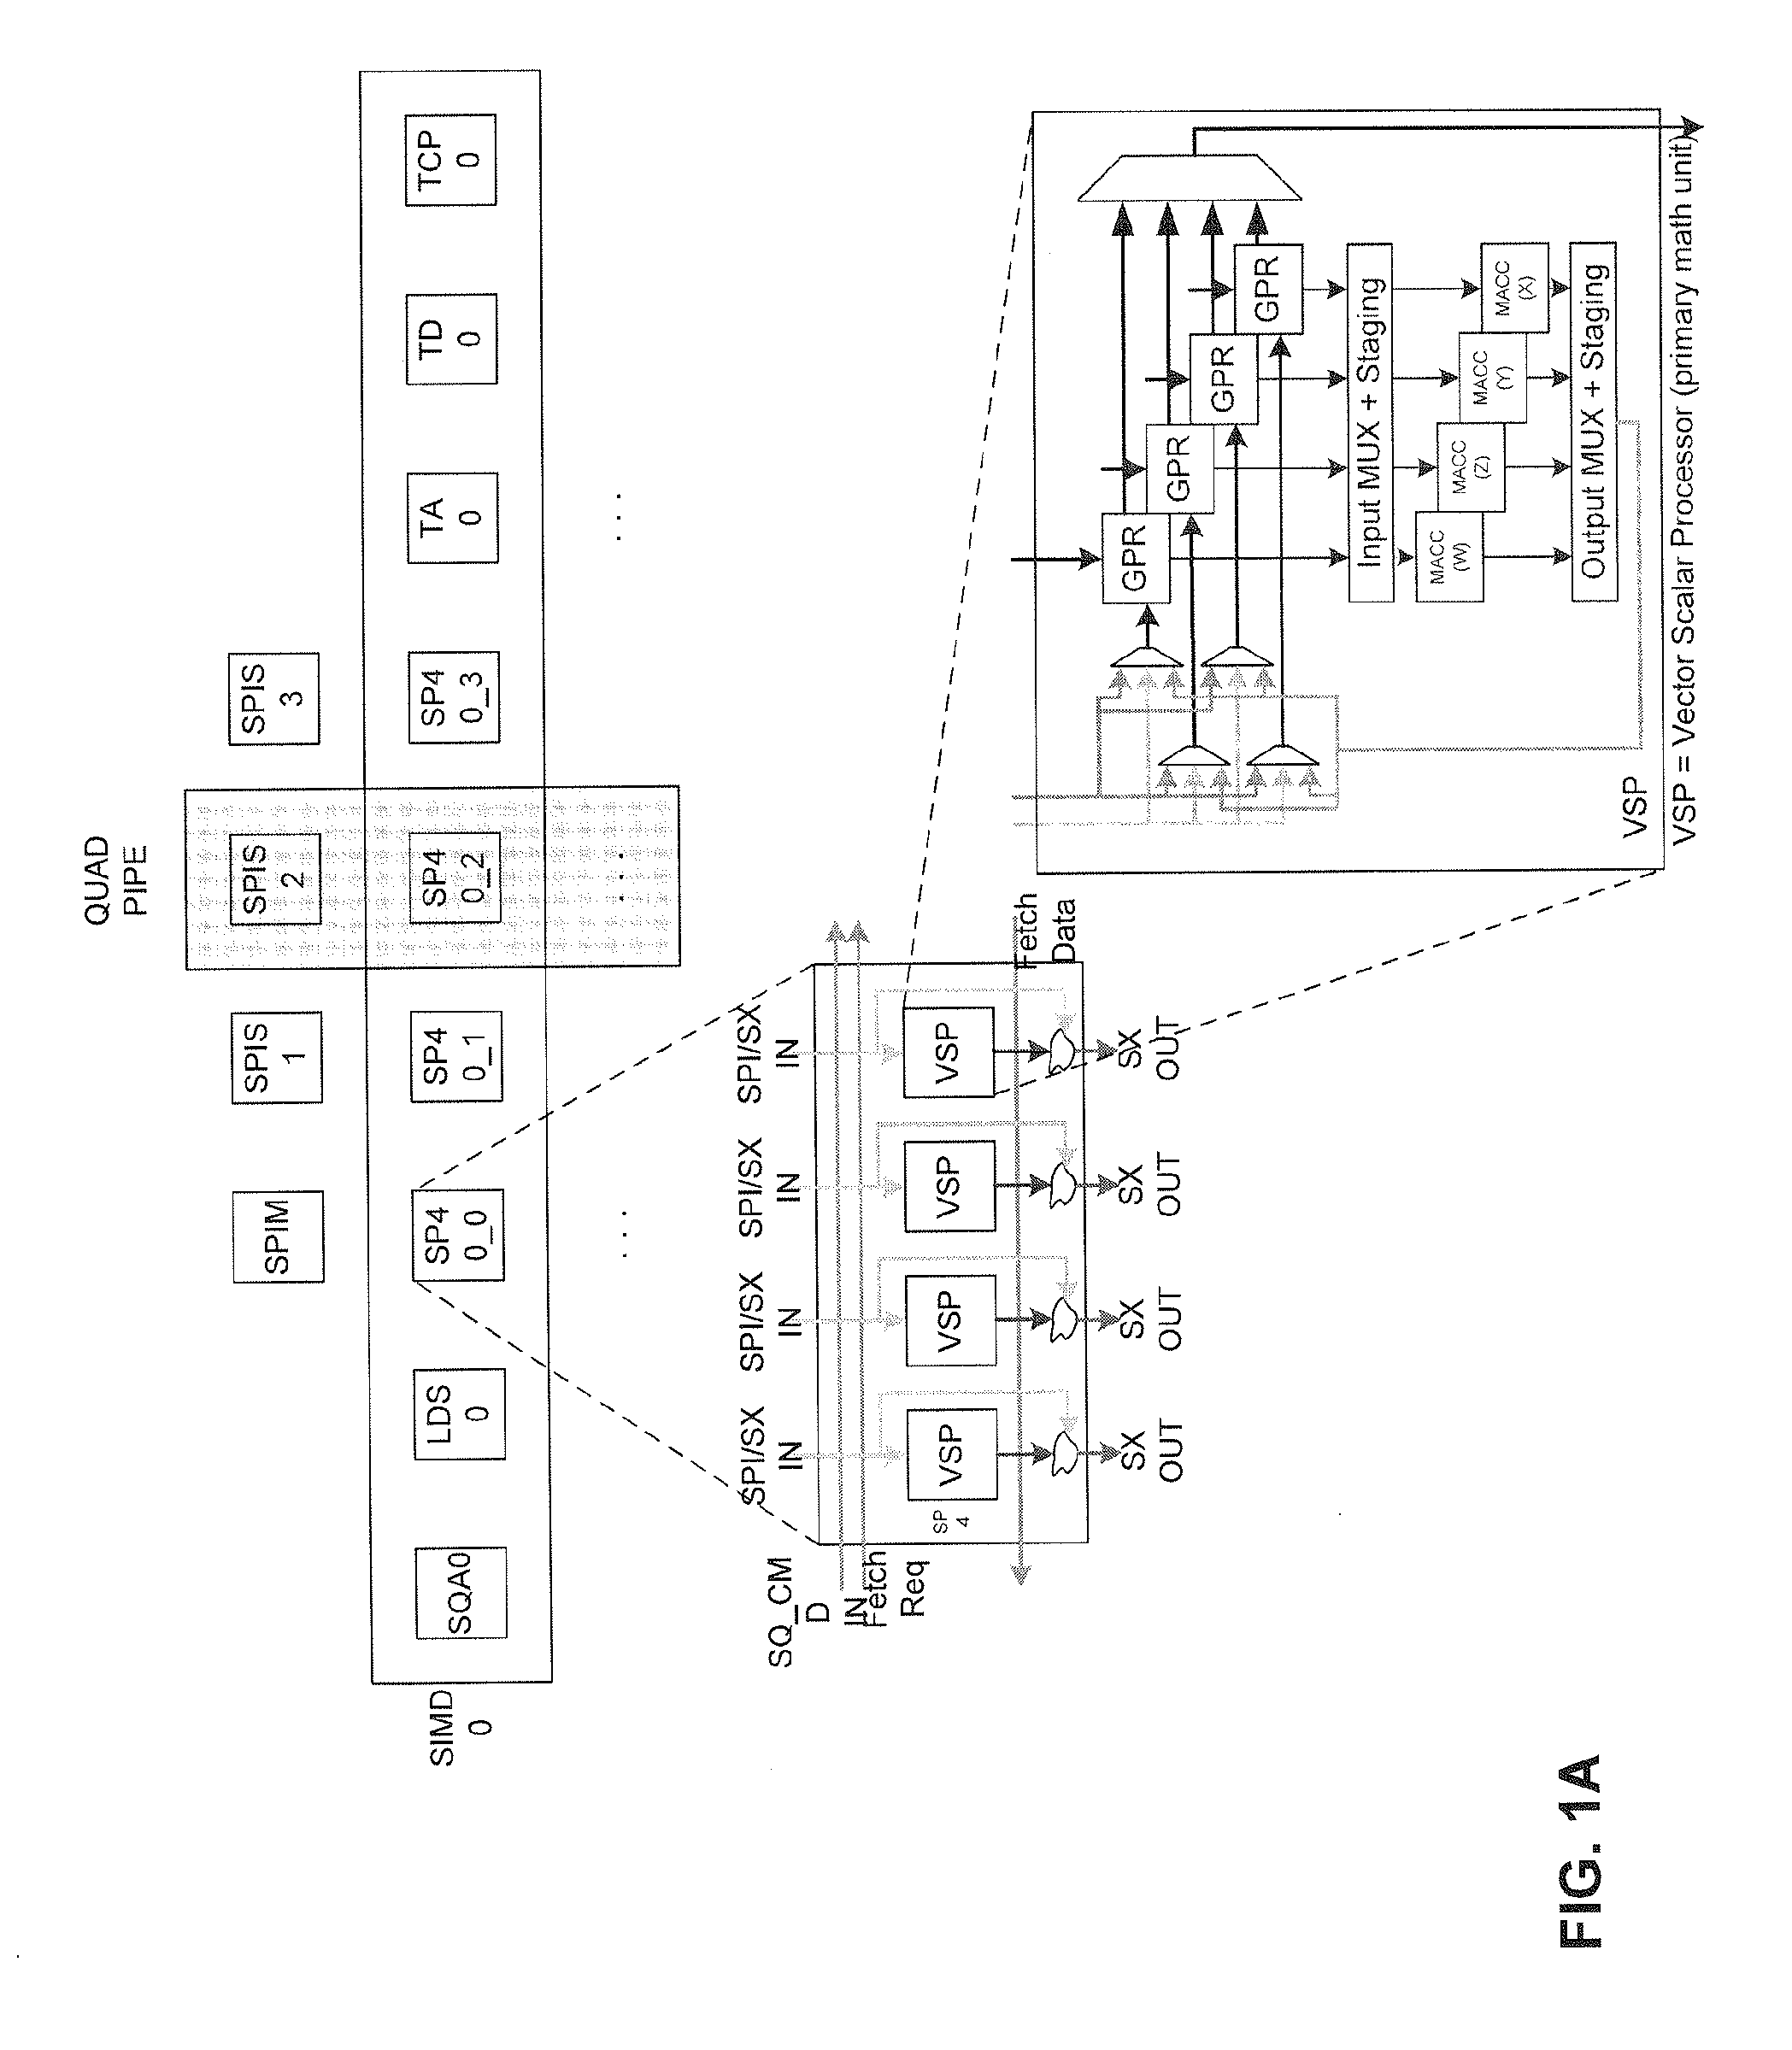 Method and System for Load Optimization for Power